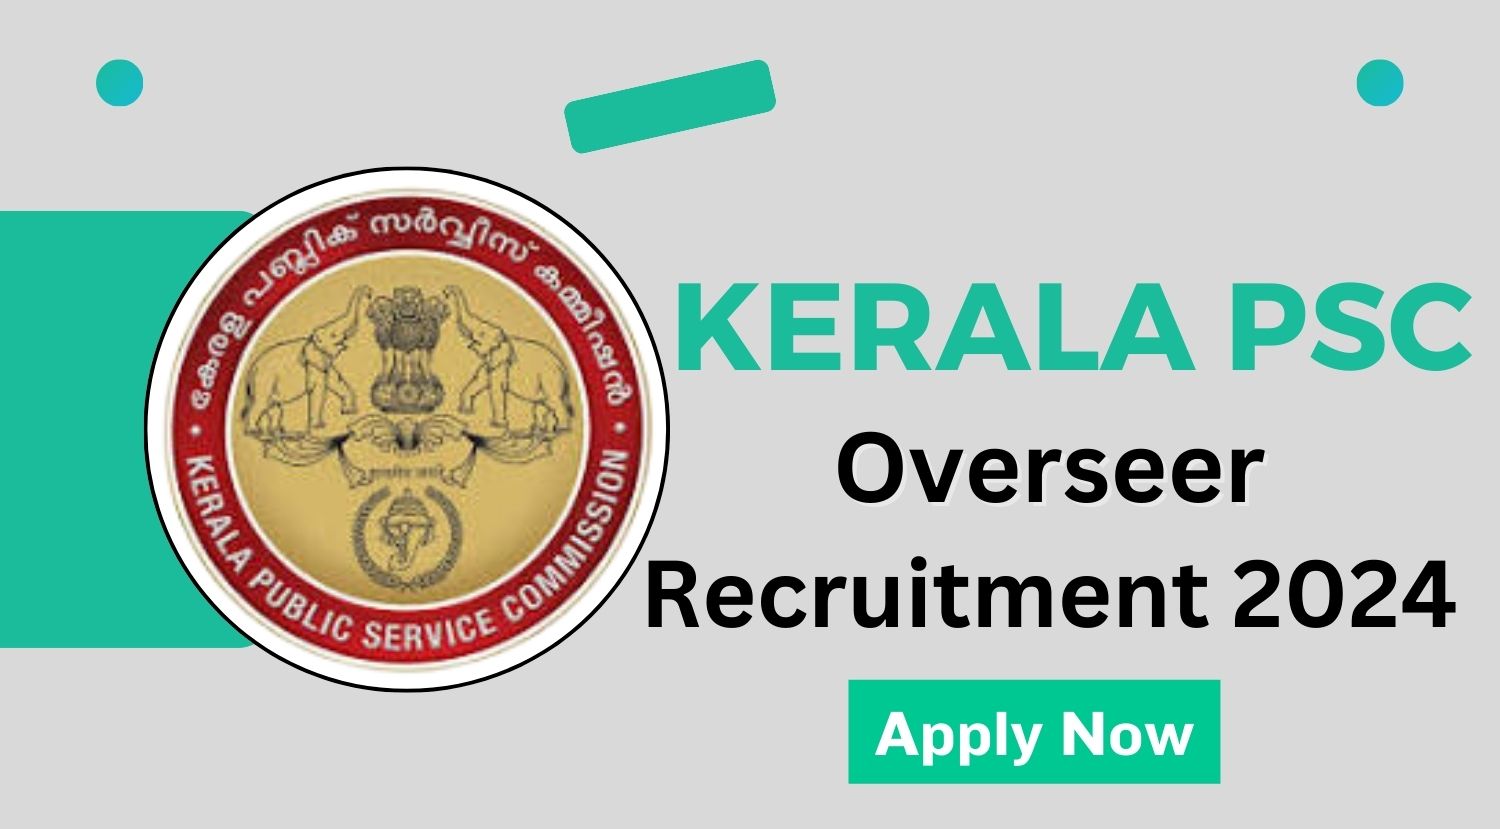 Kerala PSC Recruitment 2024 Notification Out for Overseer Post, Apply Now